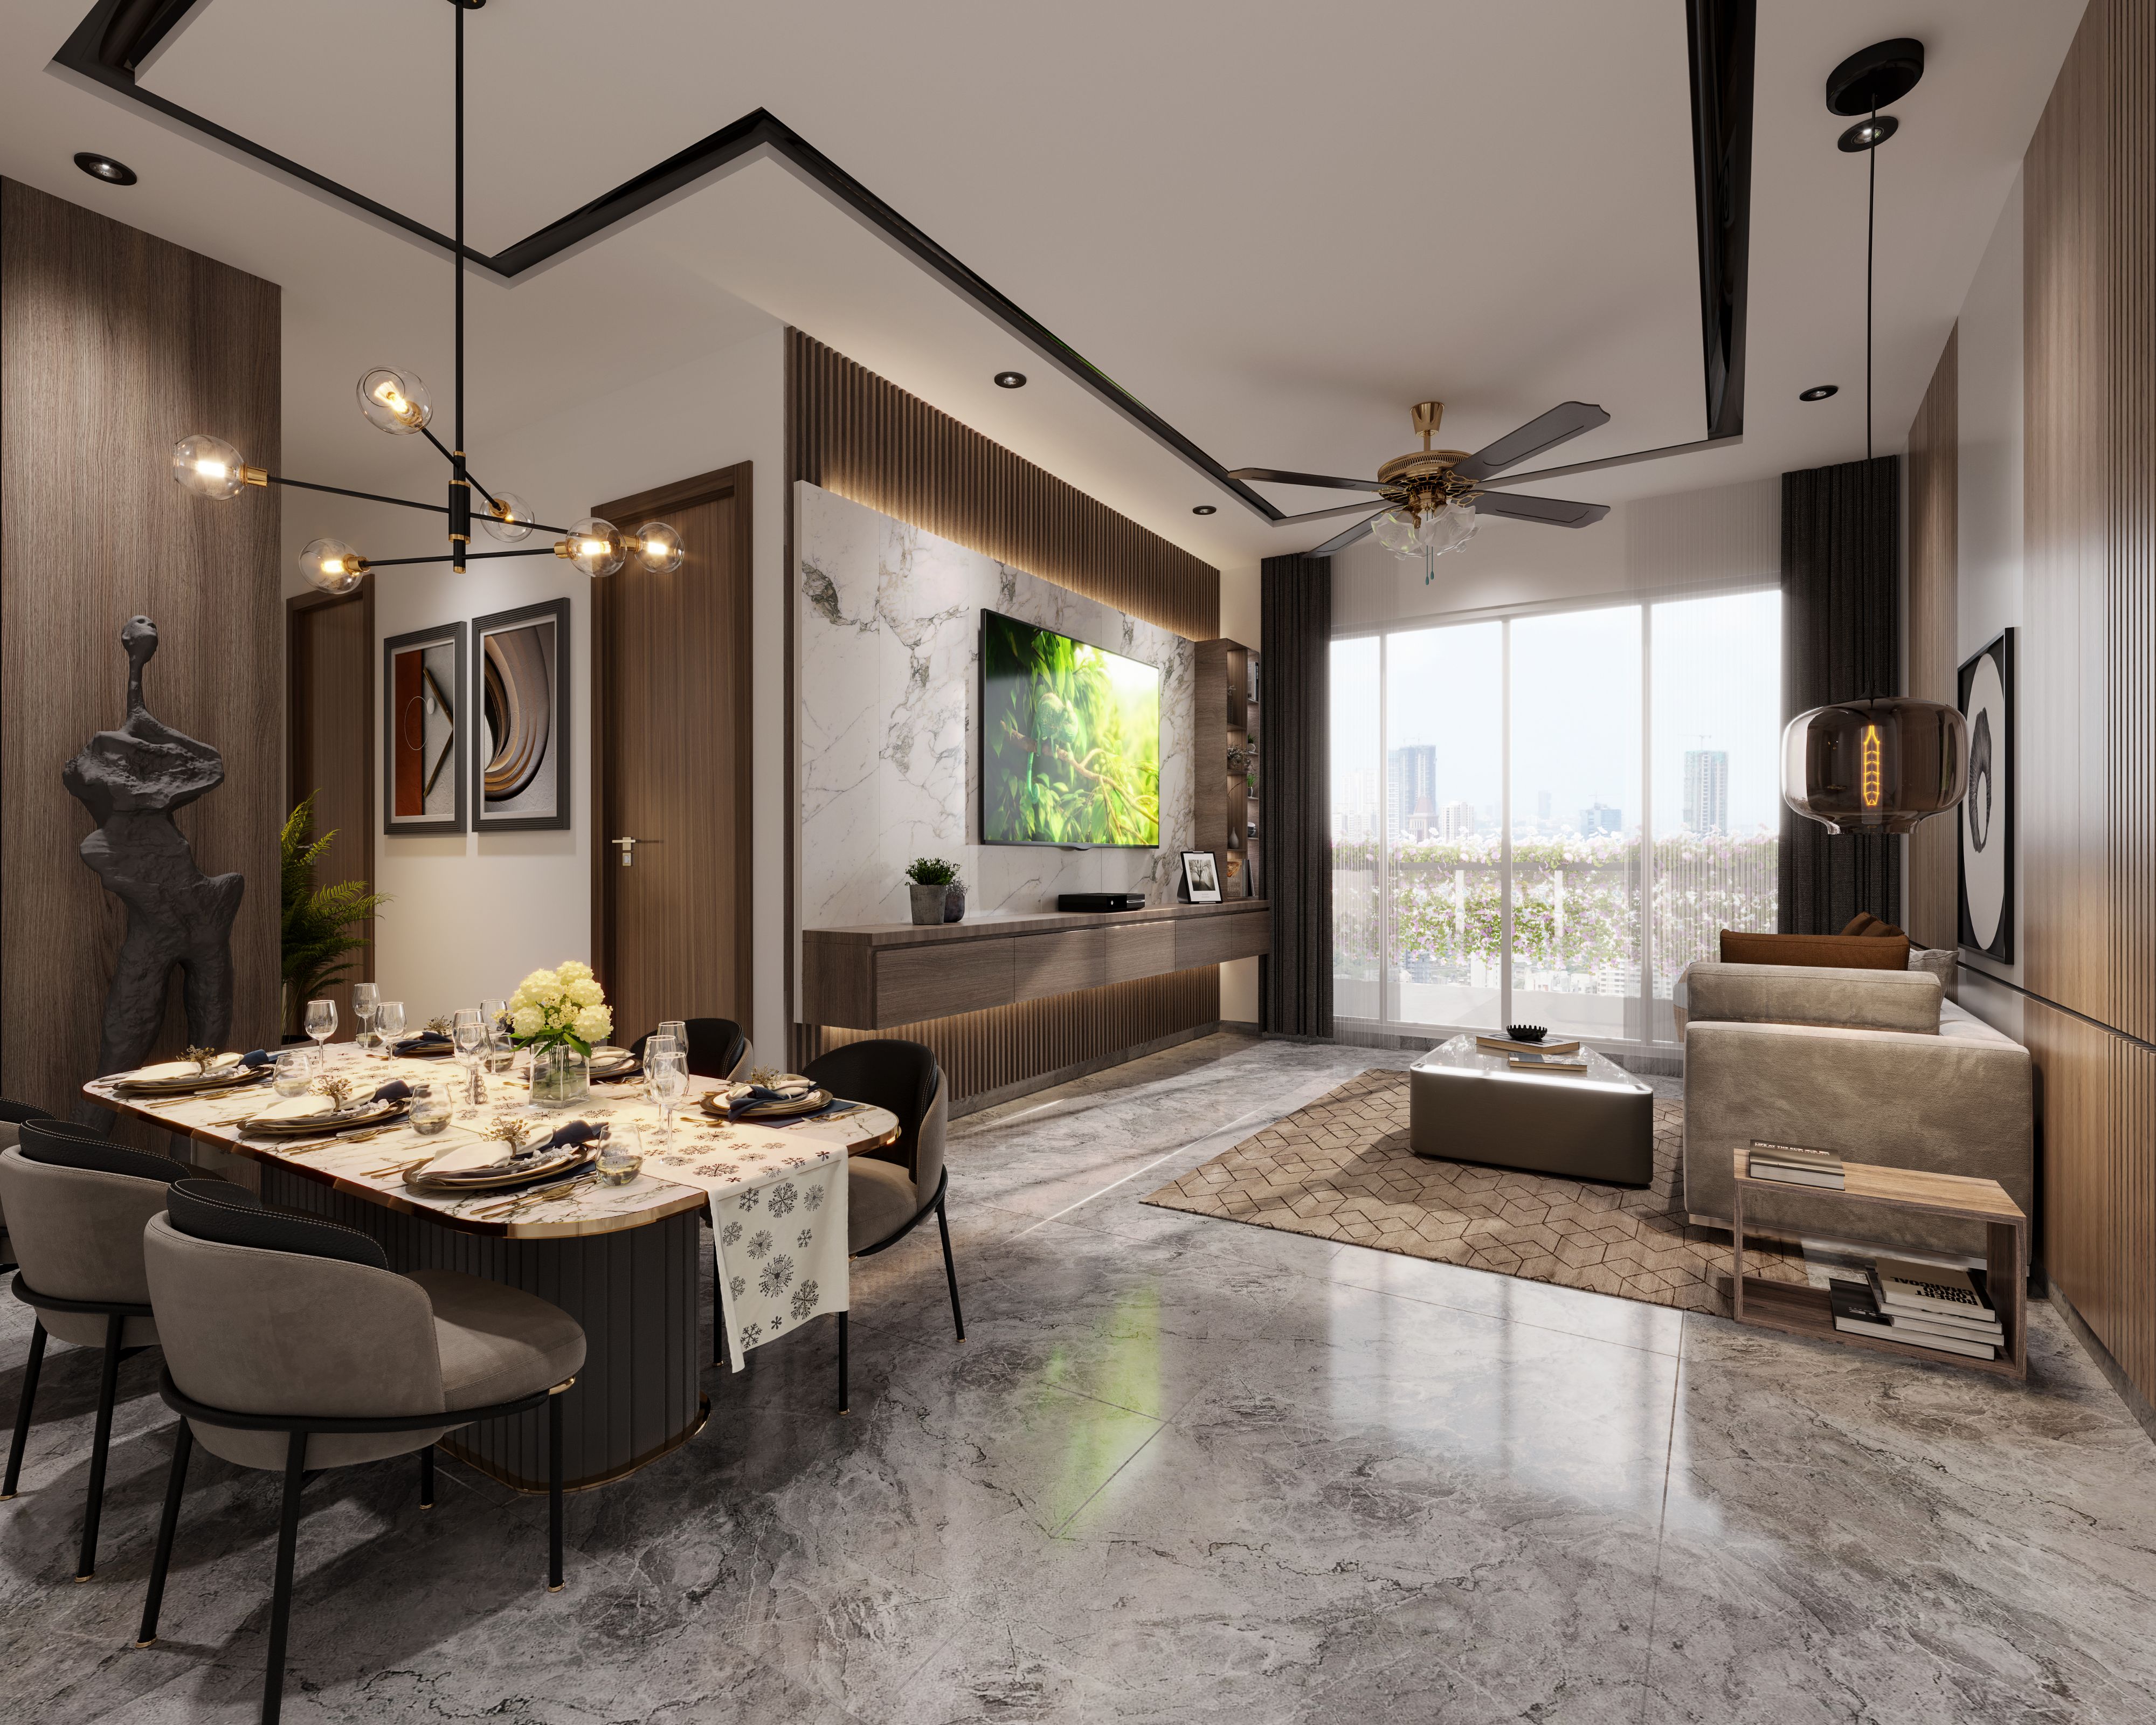 3 and 4 BHK Luxury Apartment Sector 111 at Dwarka Expressway